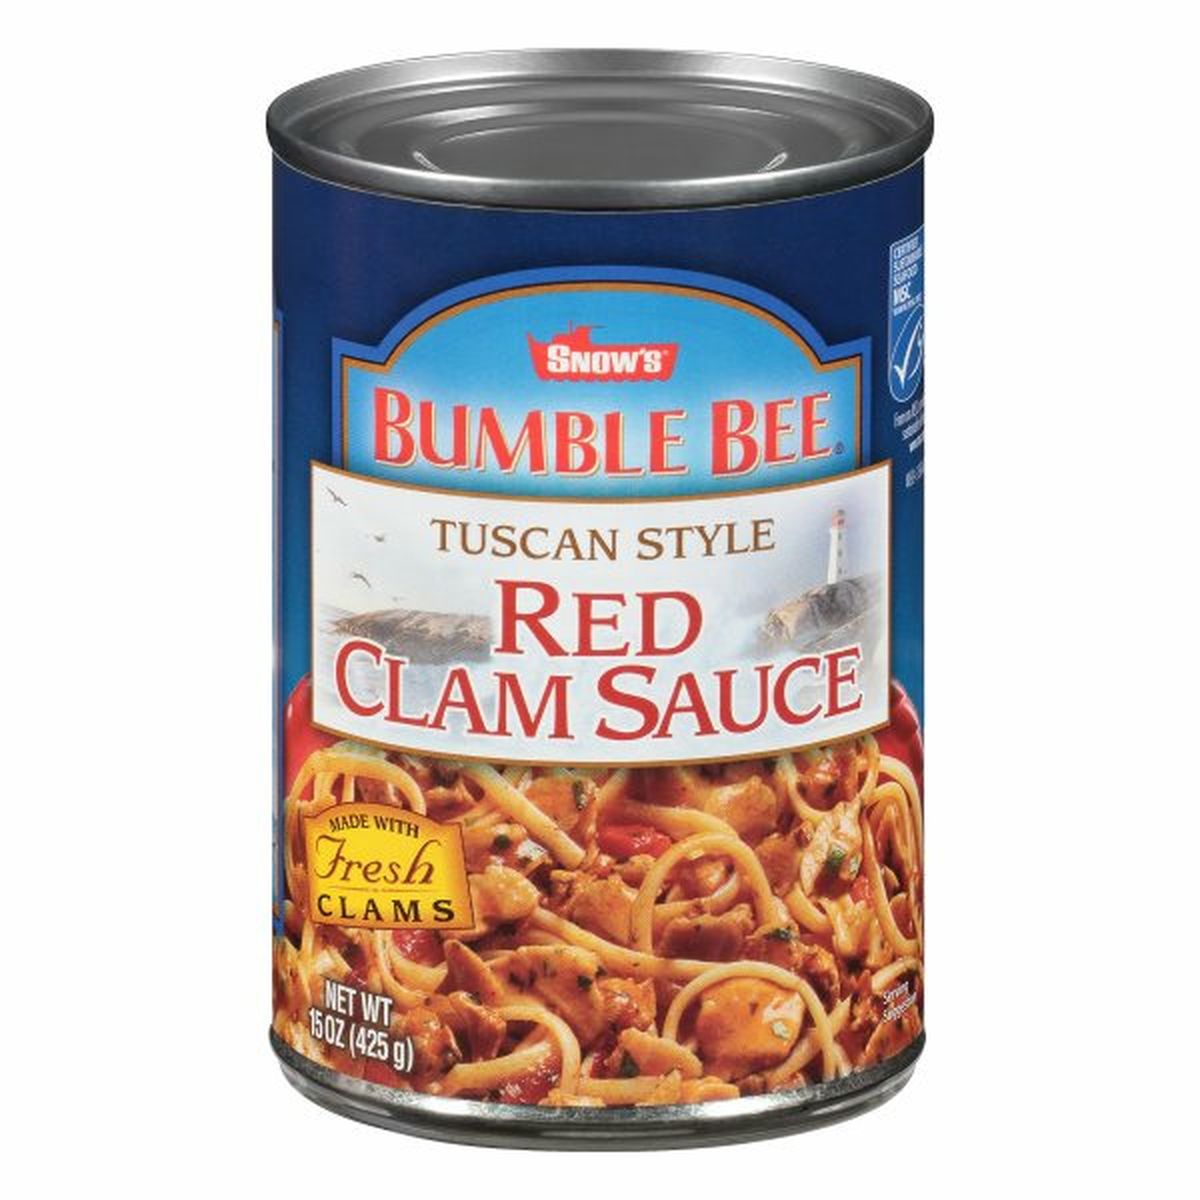 Calories in Snow's Red Clam Sauce, Tuscan Style